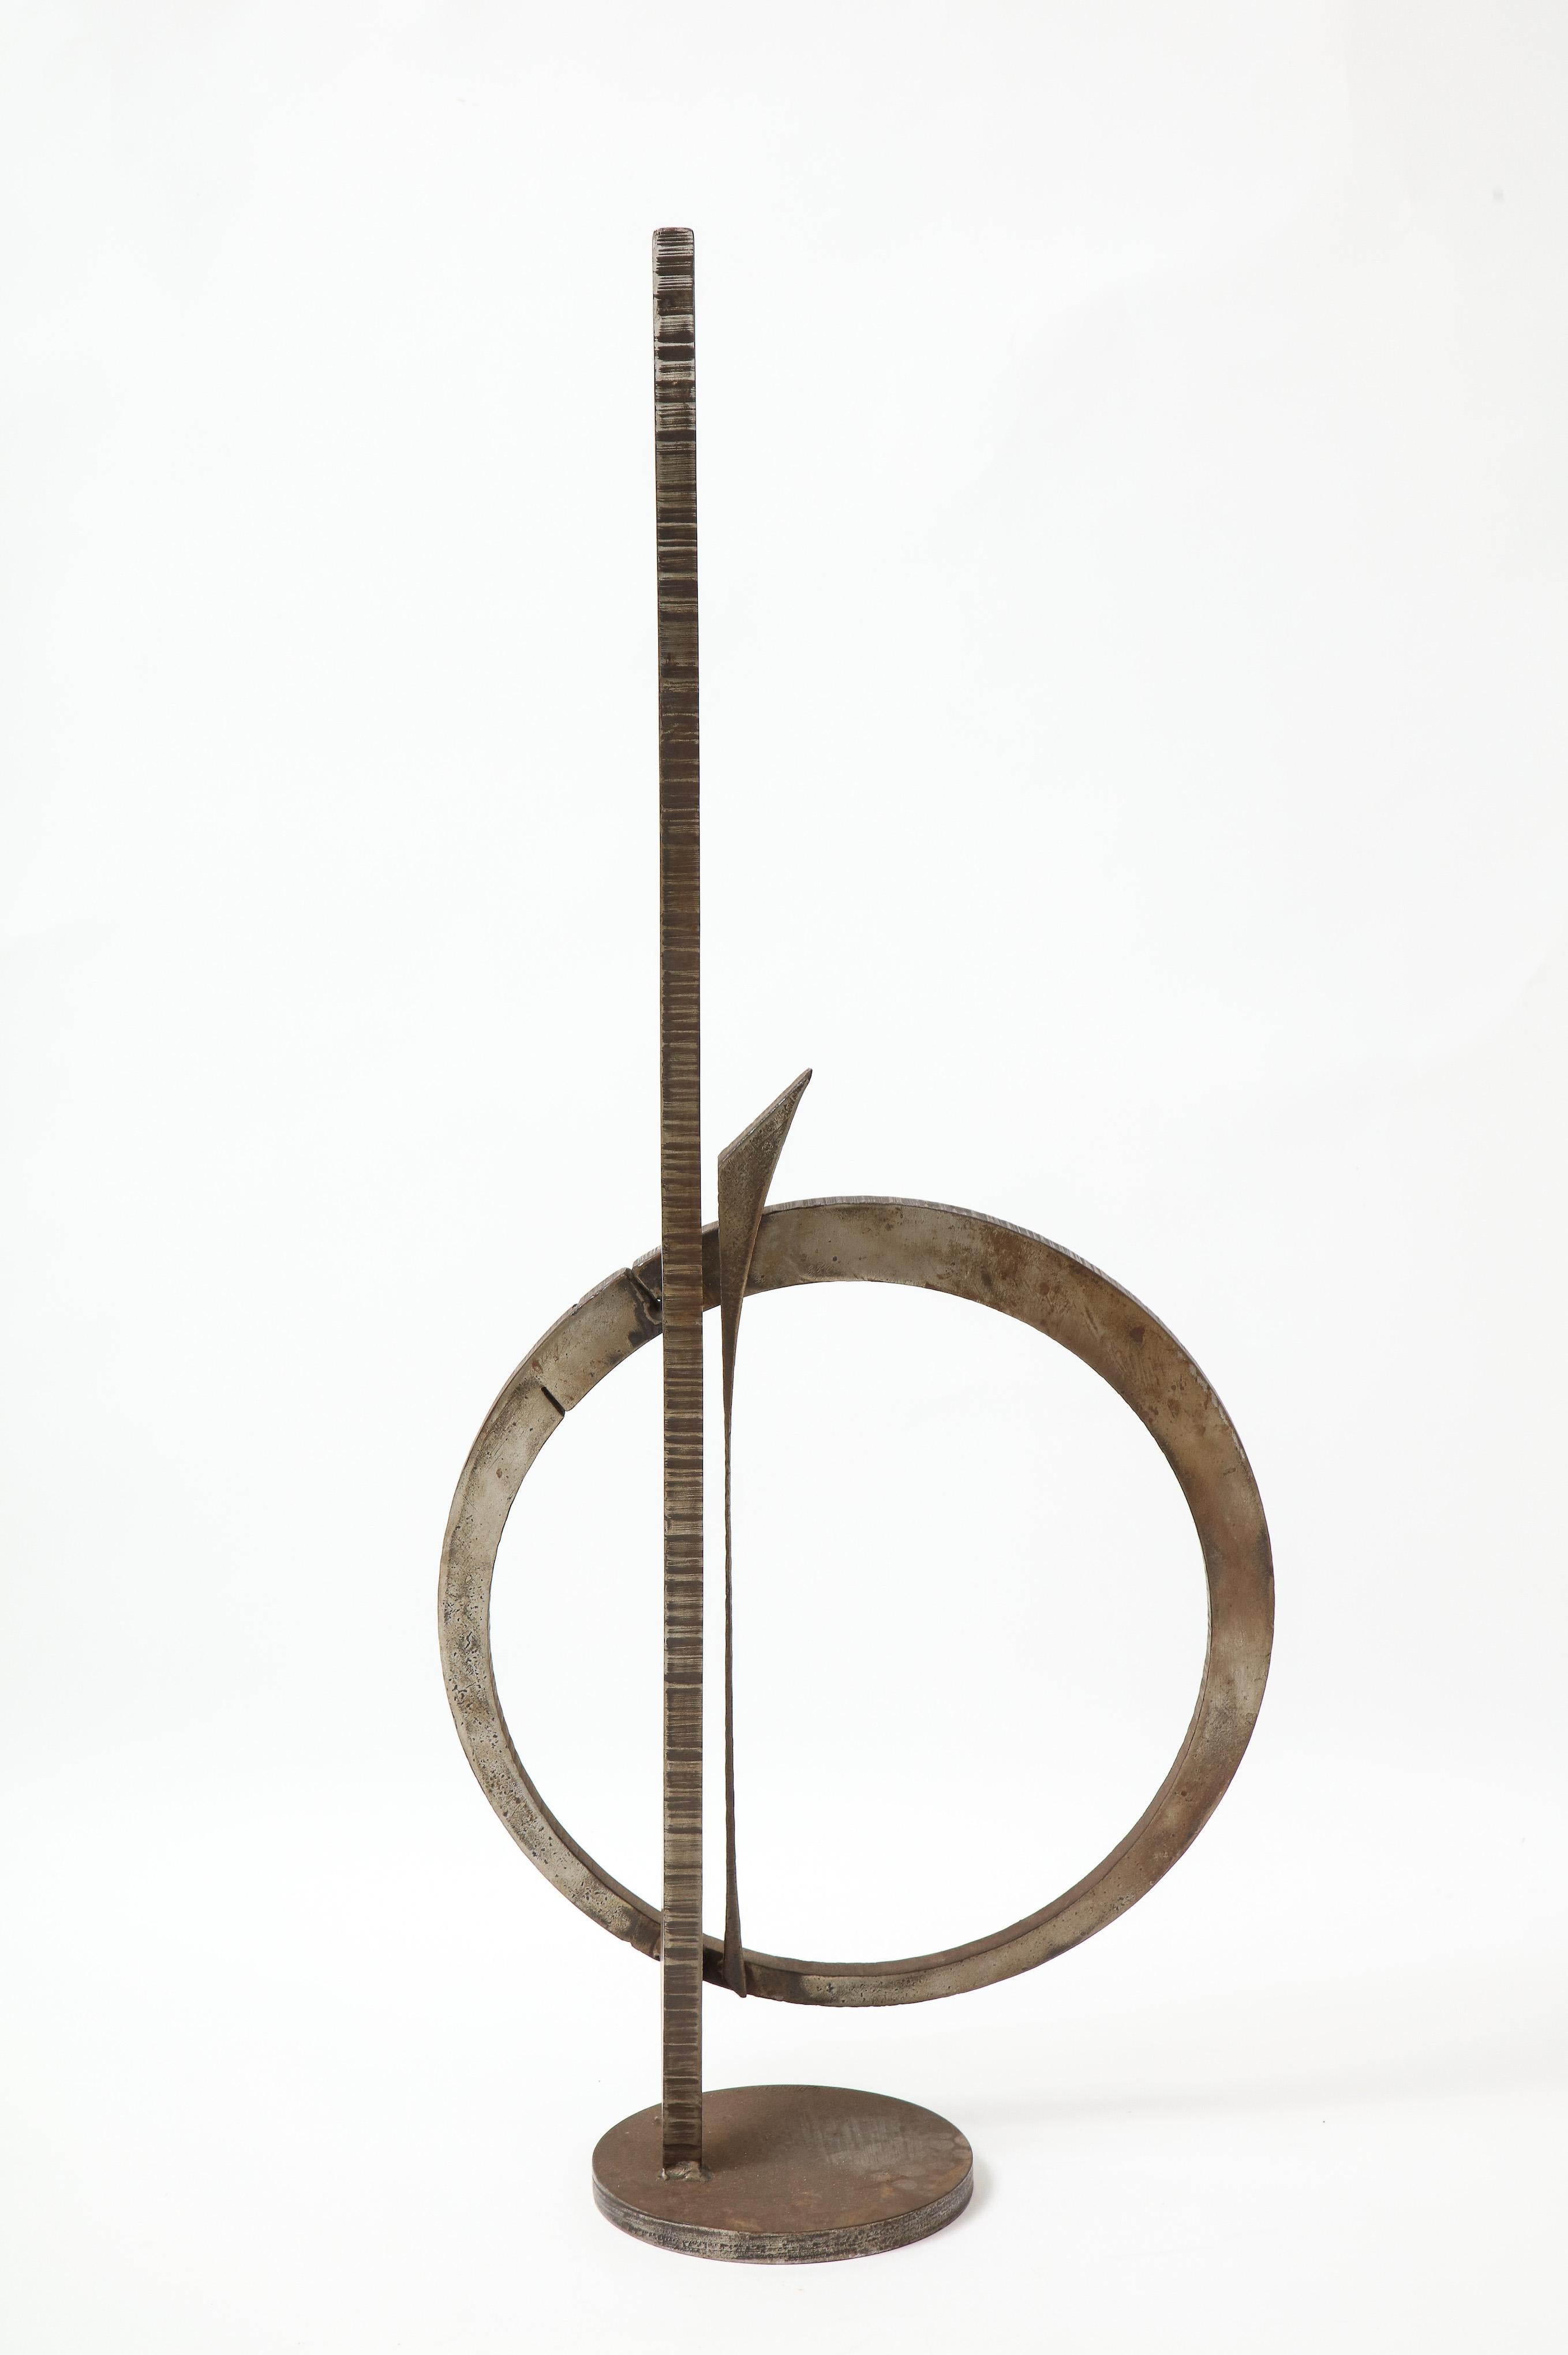 Wrought iron sculpture by Amilar Zannoni
signed: 